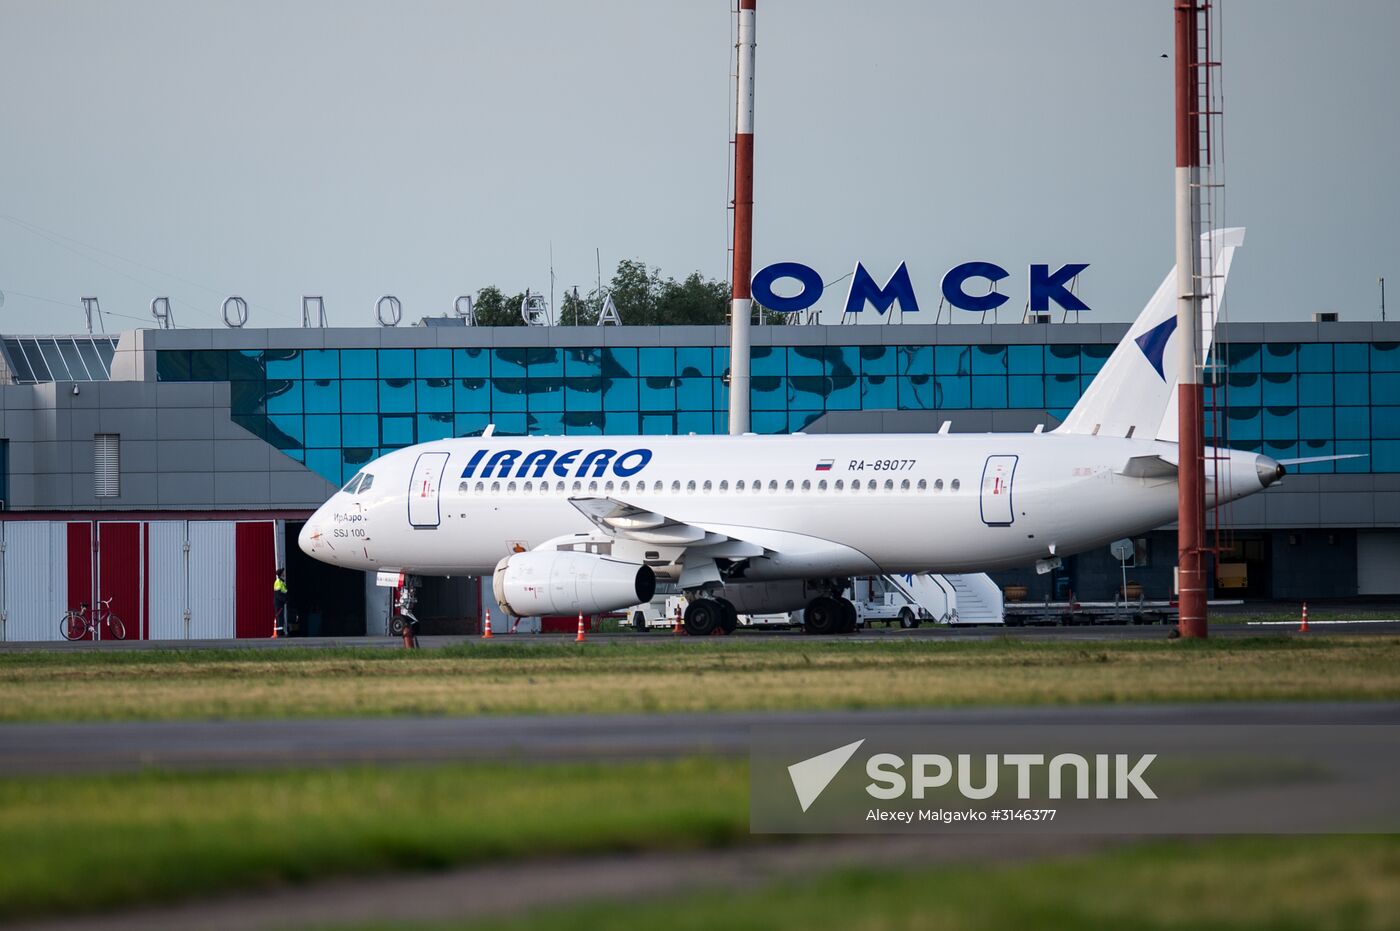 Planes at Omsk Central International Airport